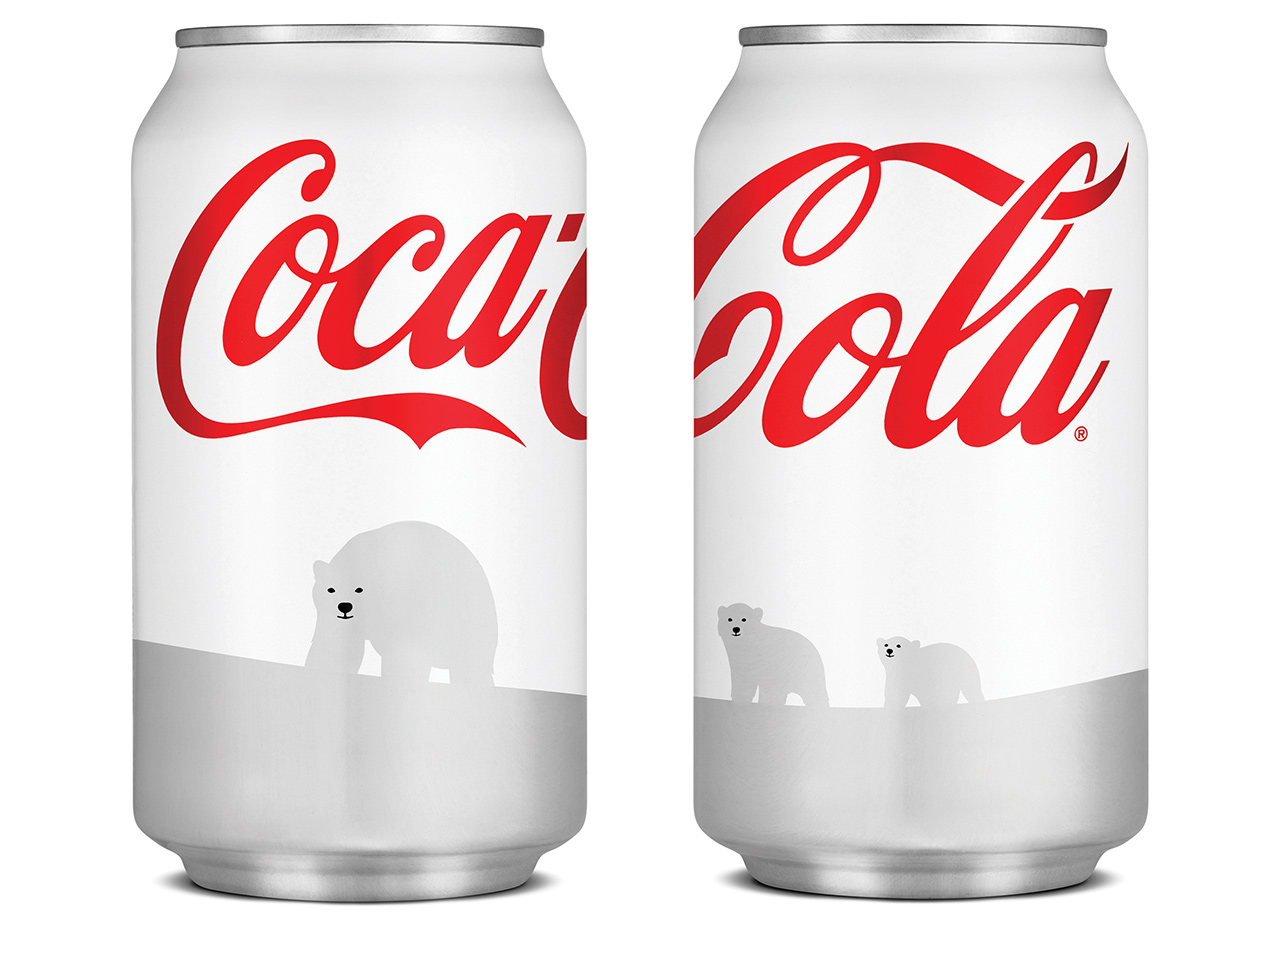 Coca Cola's infamous white can experiment failed, partly because consumers perceived a formula change due to the new packaging color.